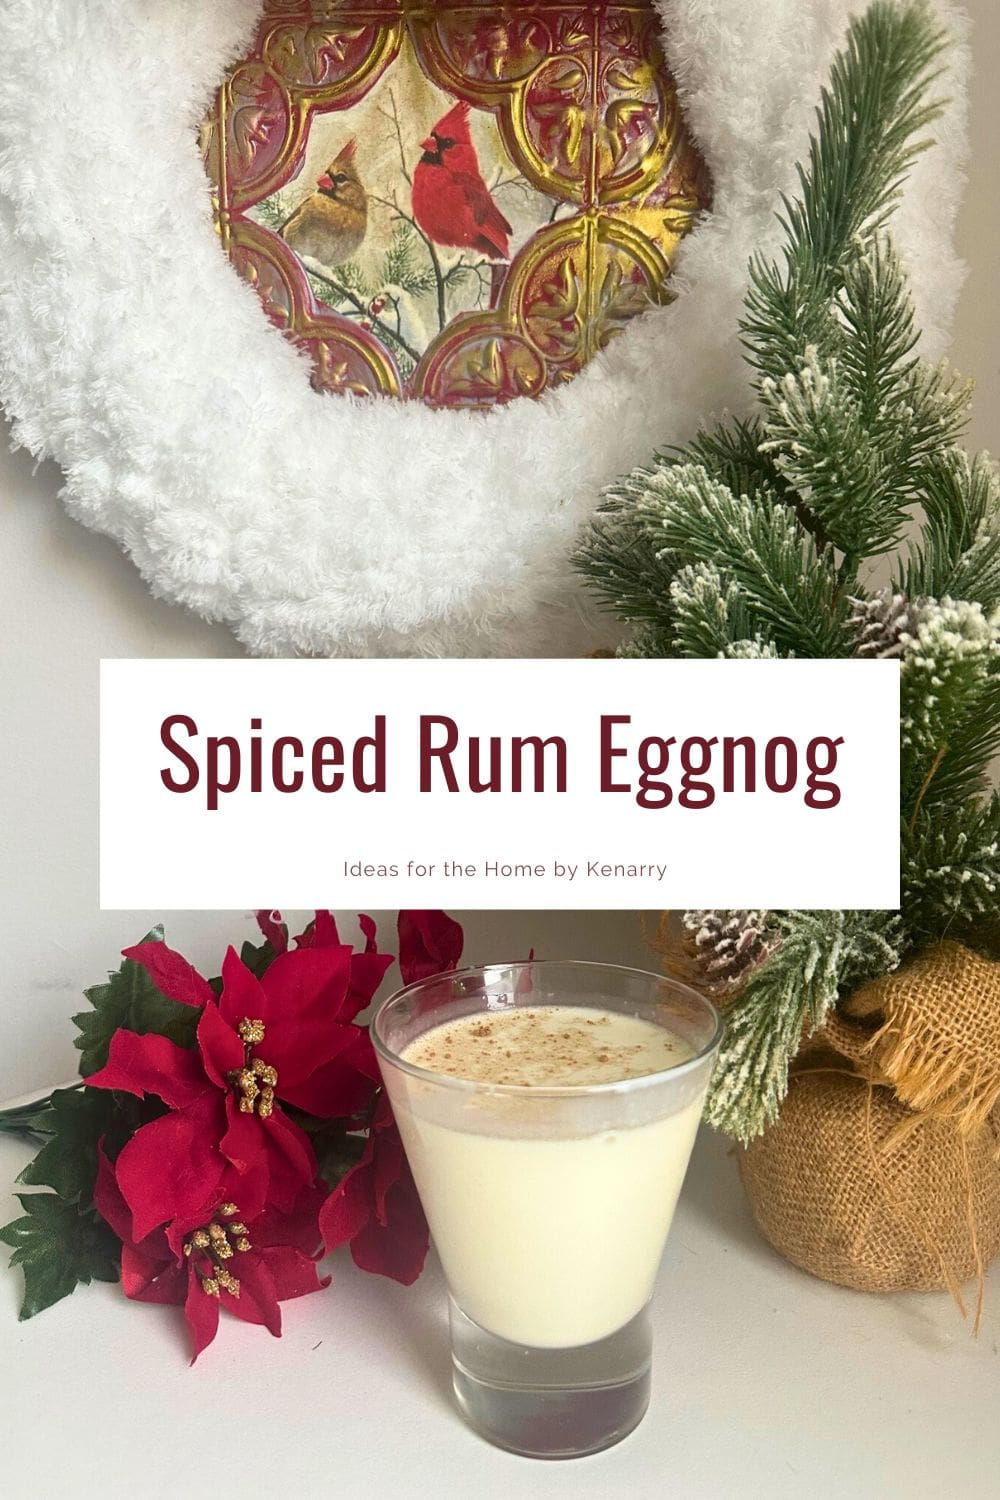 eggnog shown with holiday decor